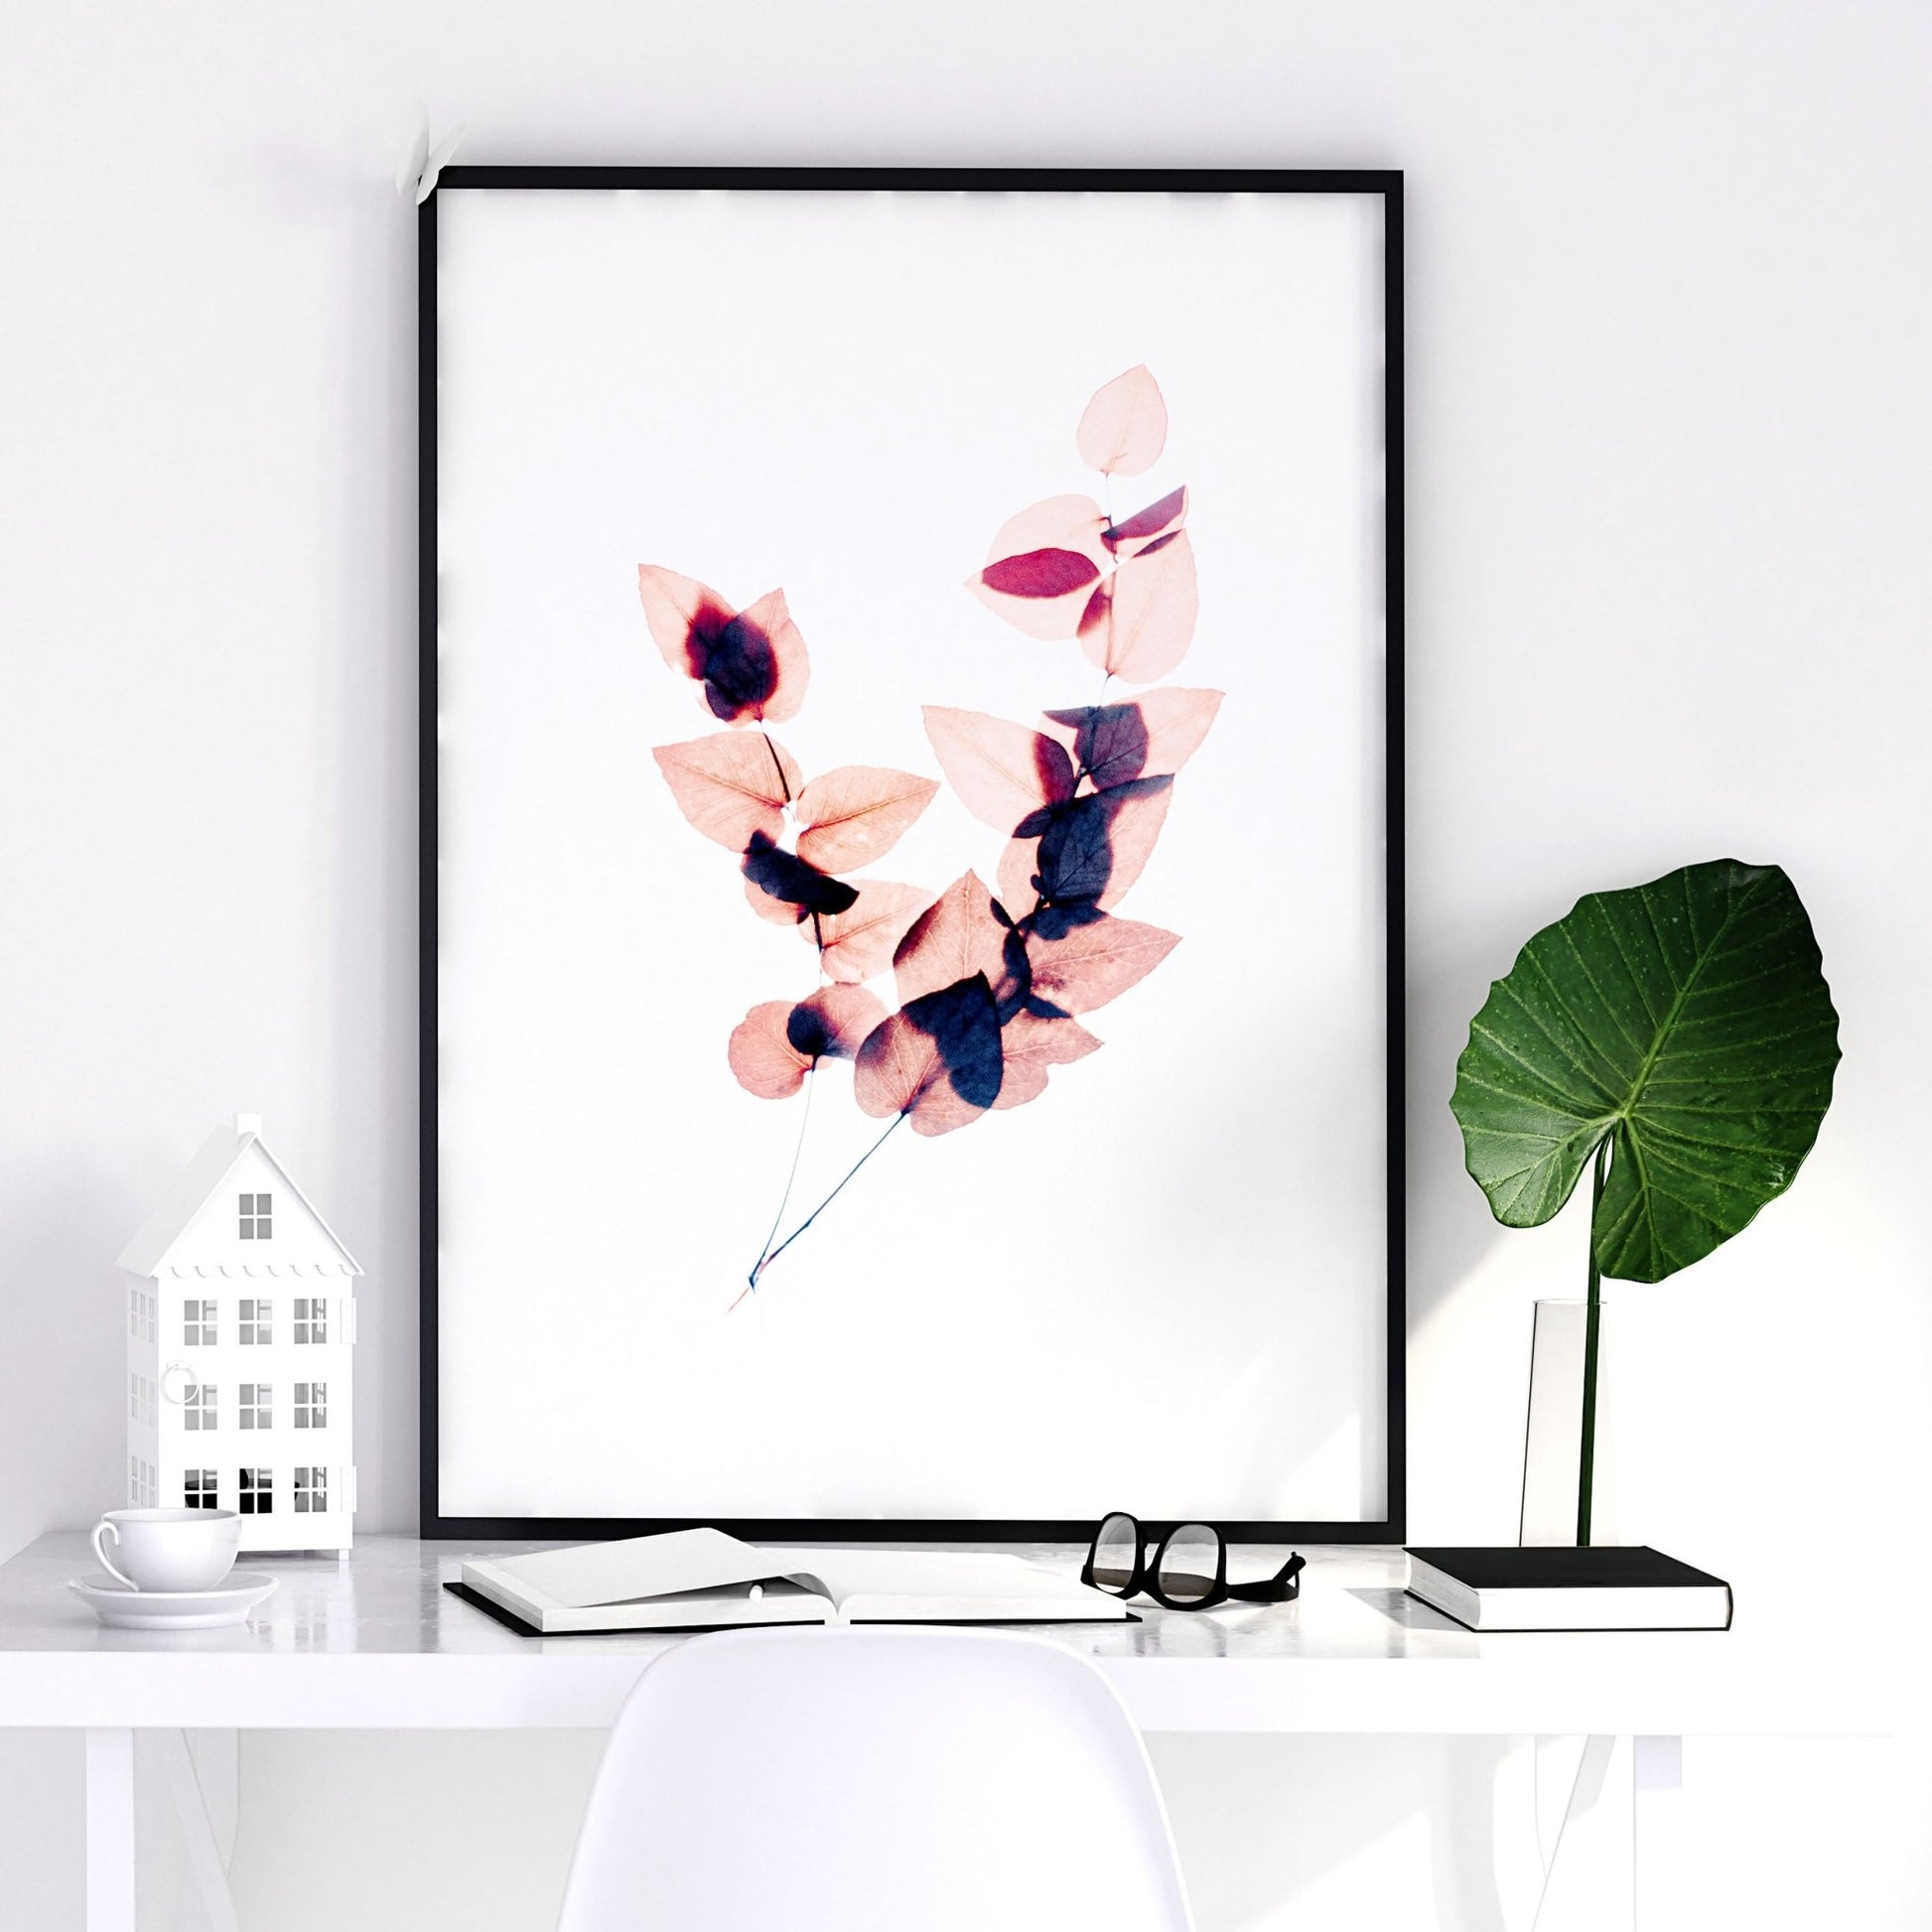 Prints for living room | set of 2 wall art - About Wall Art